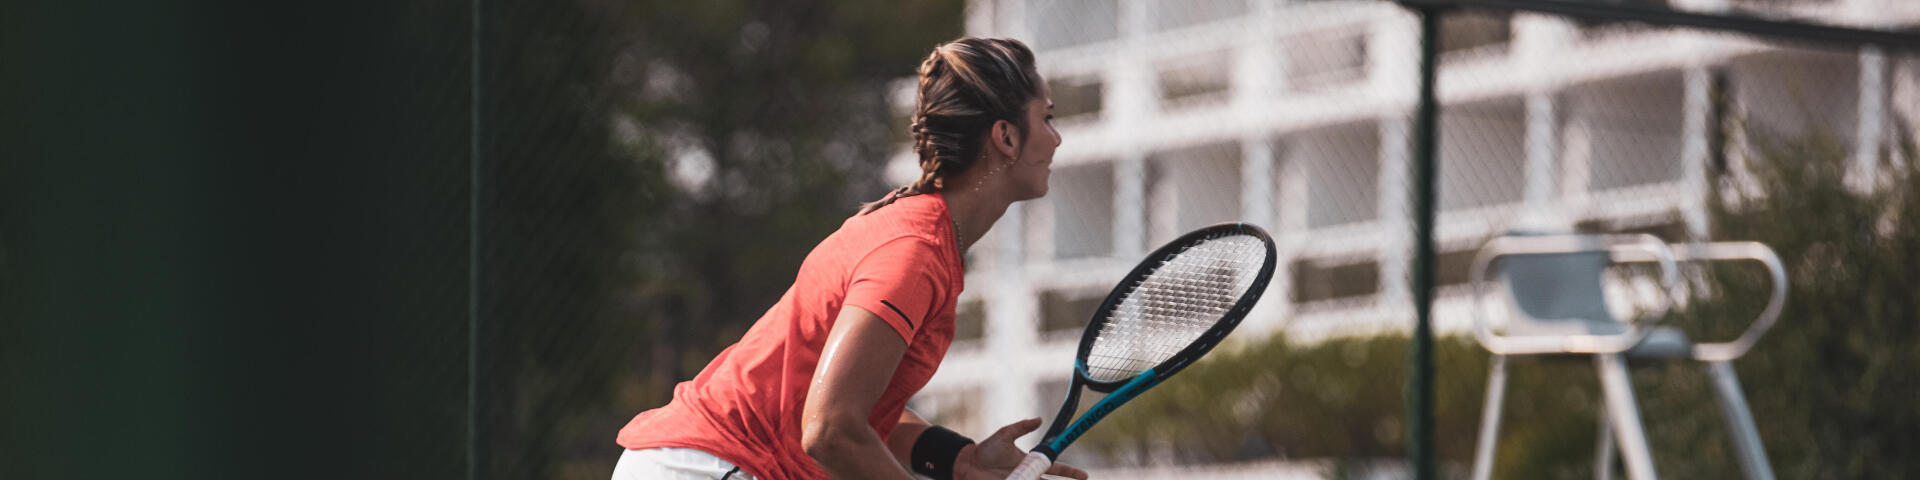 Tennis drills: the forehand